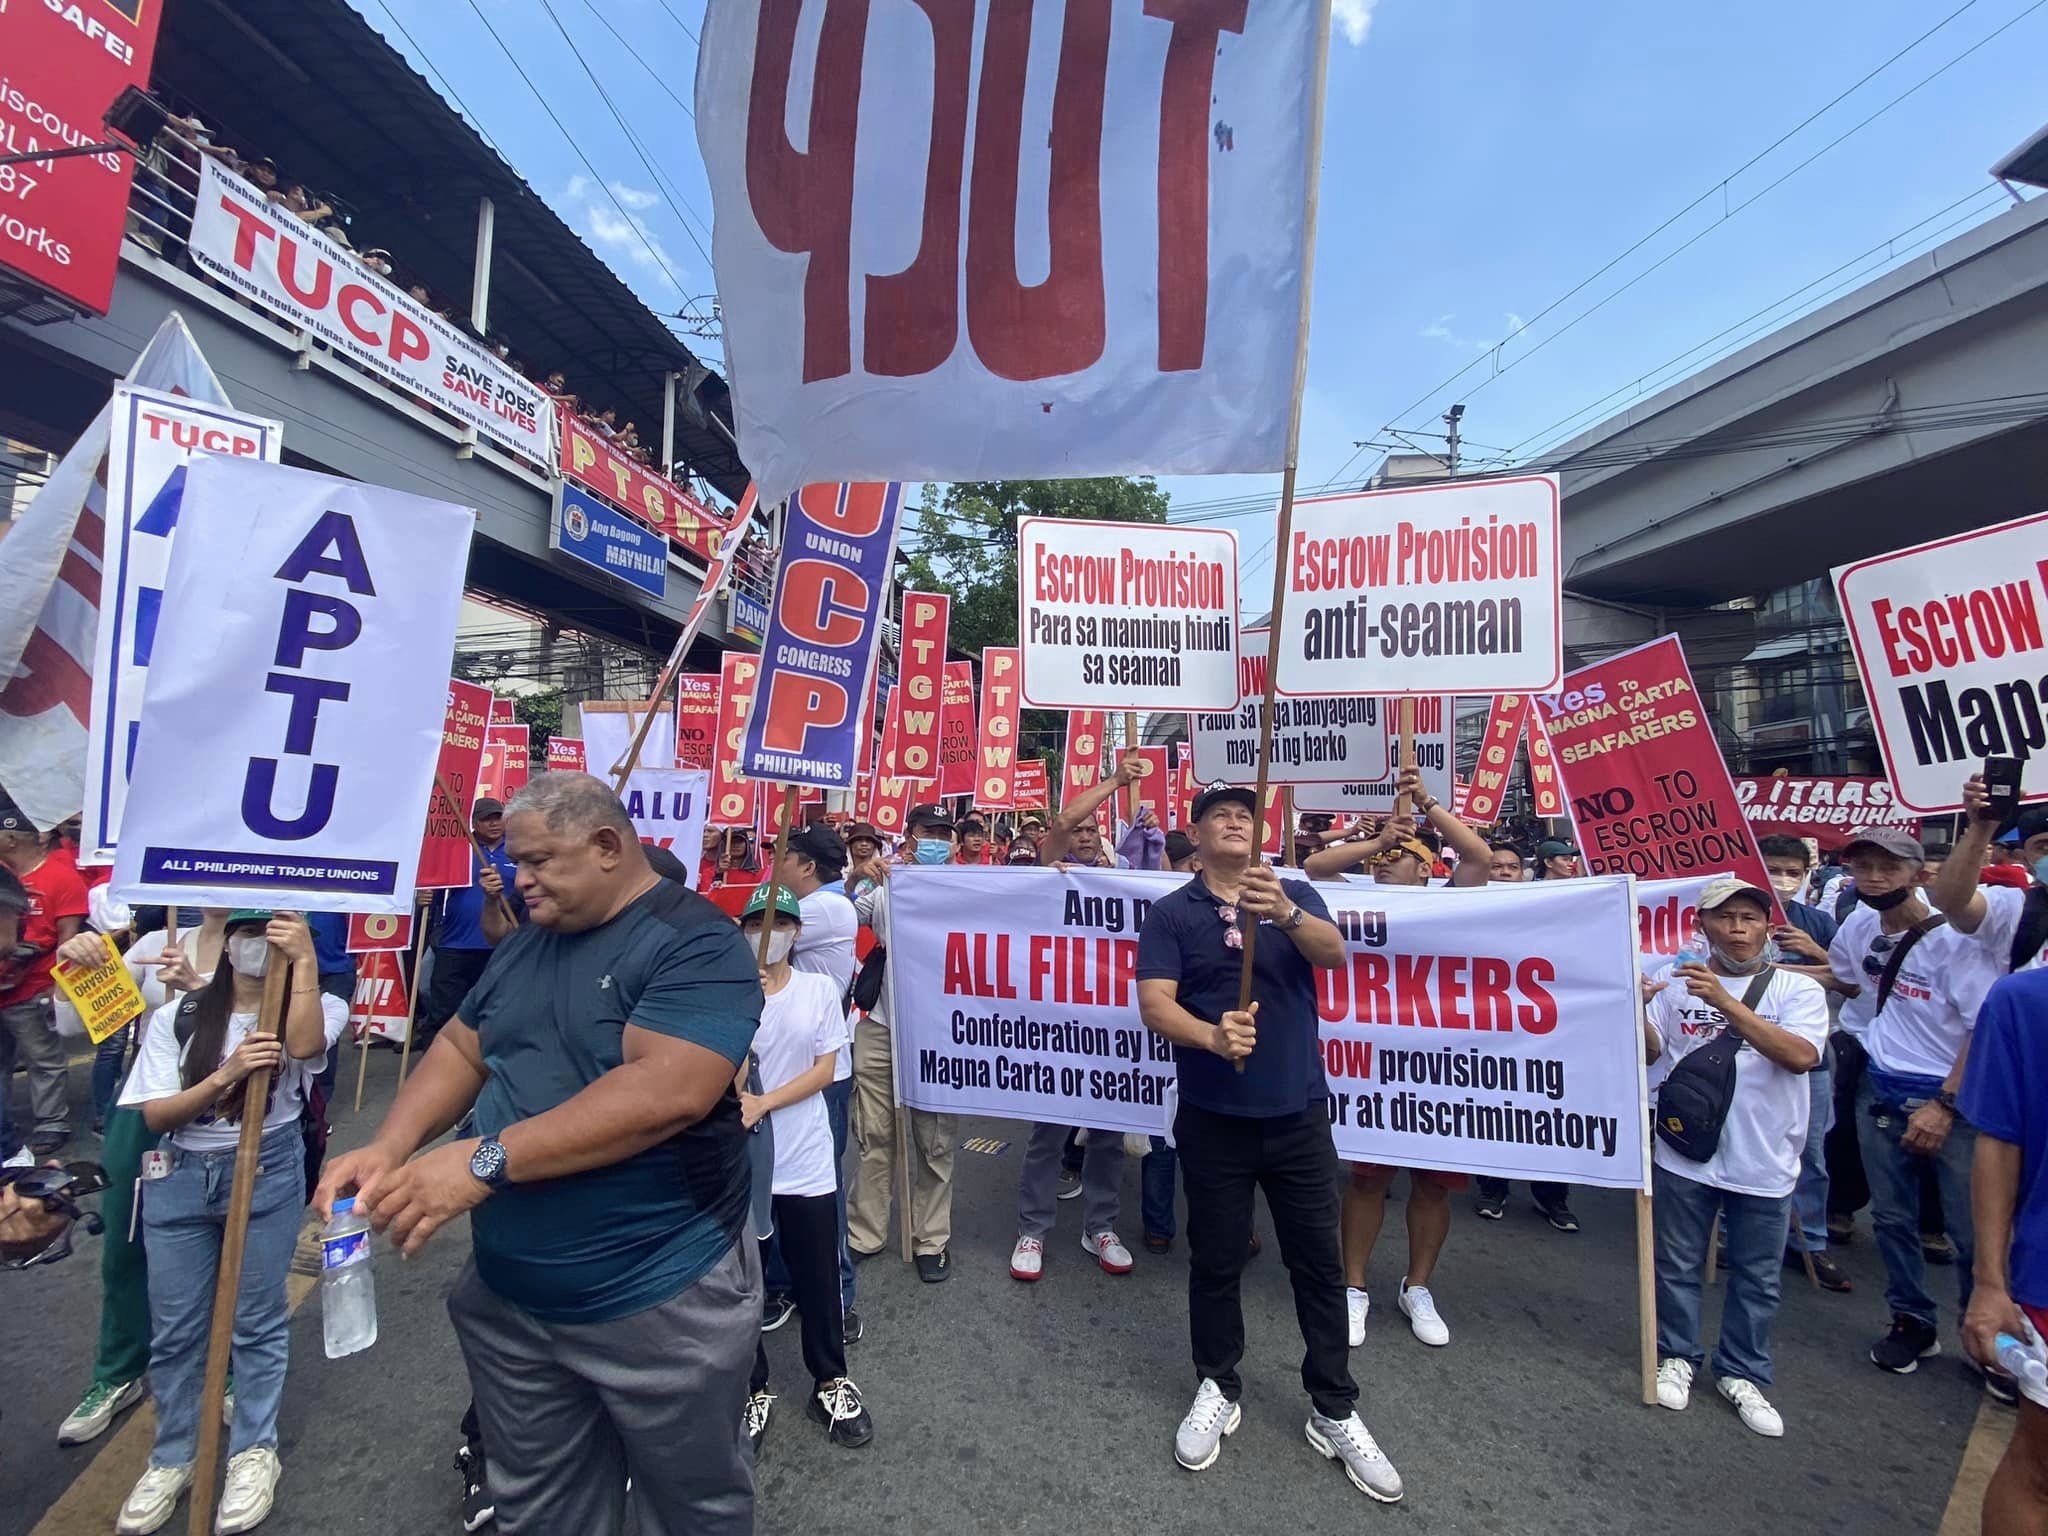 Protestors in Philippines marching on the street with banners "Escrow Provision Anti-Seaman"